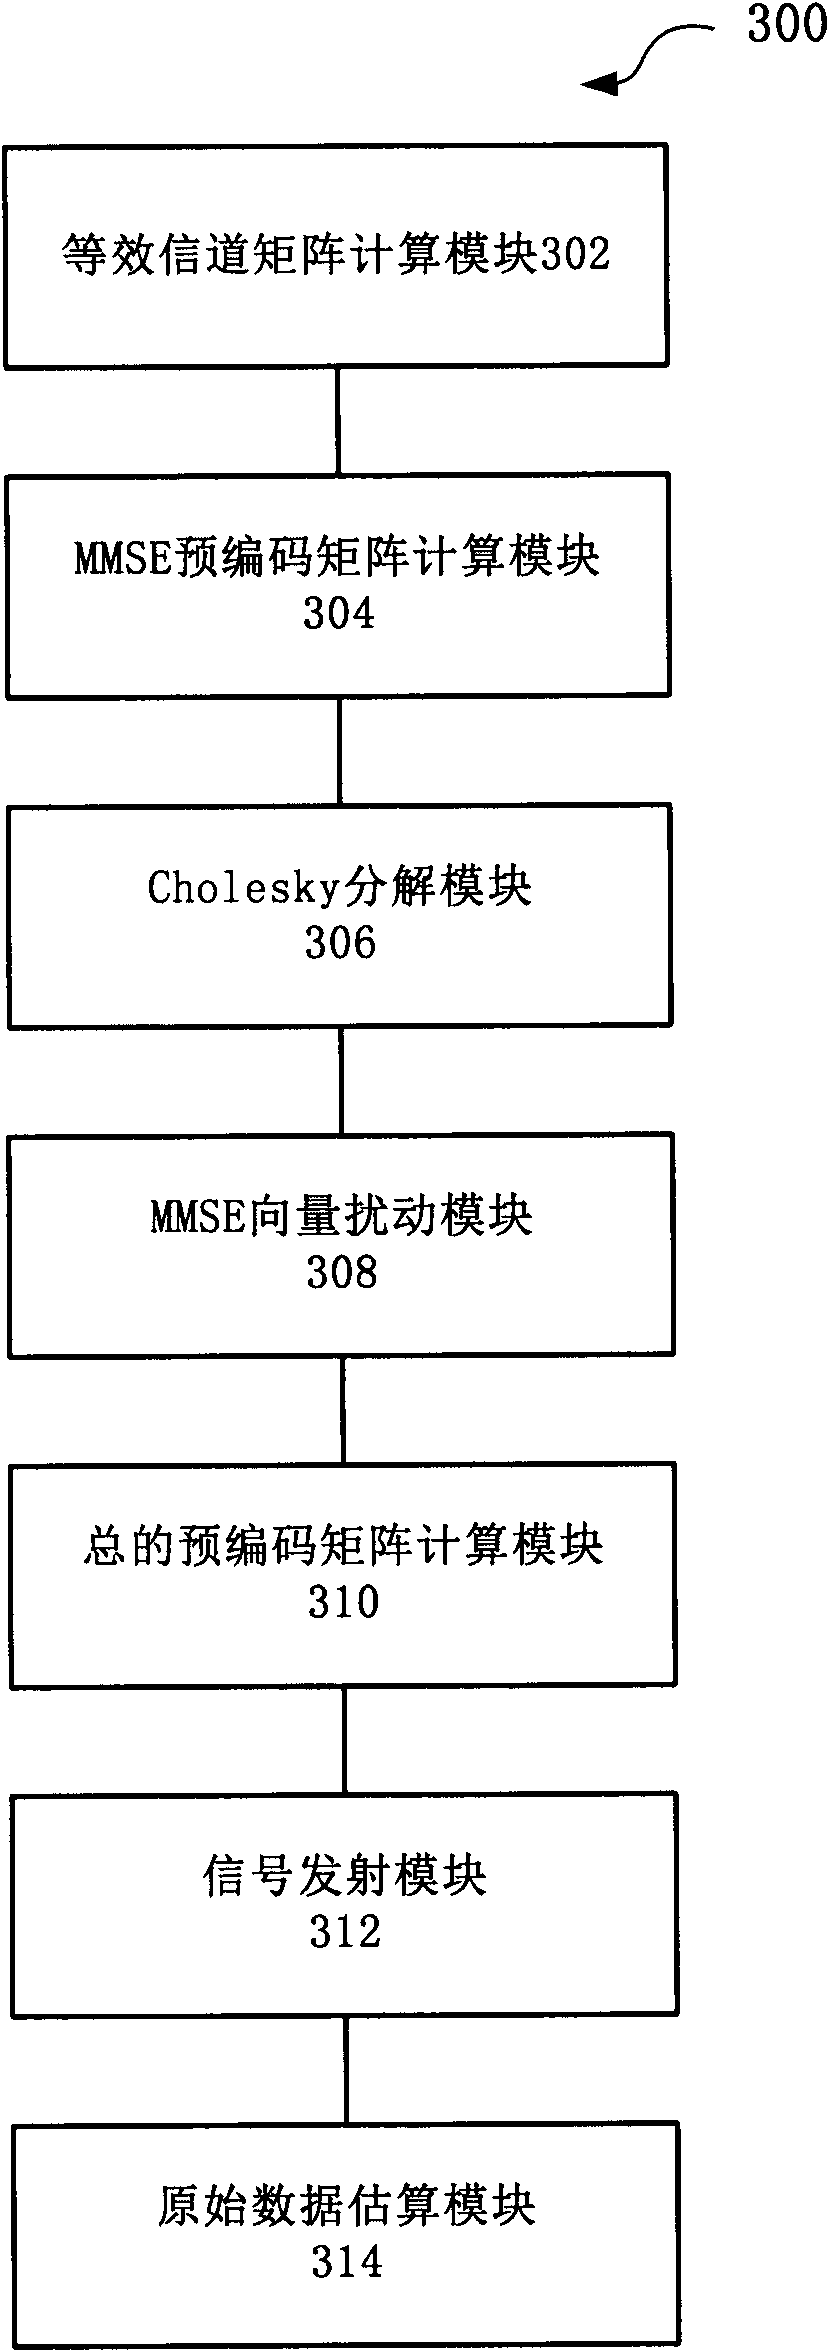 Method and system for precoding multi-user multi-input multi-output downlink